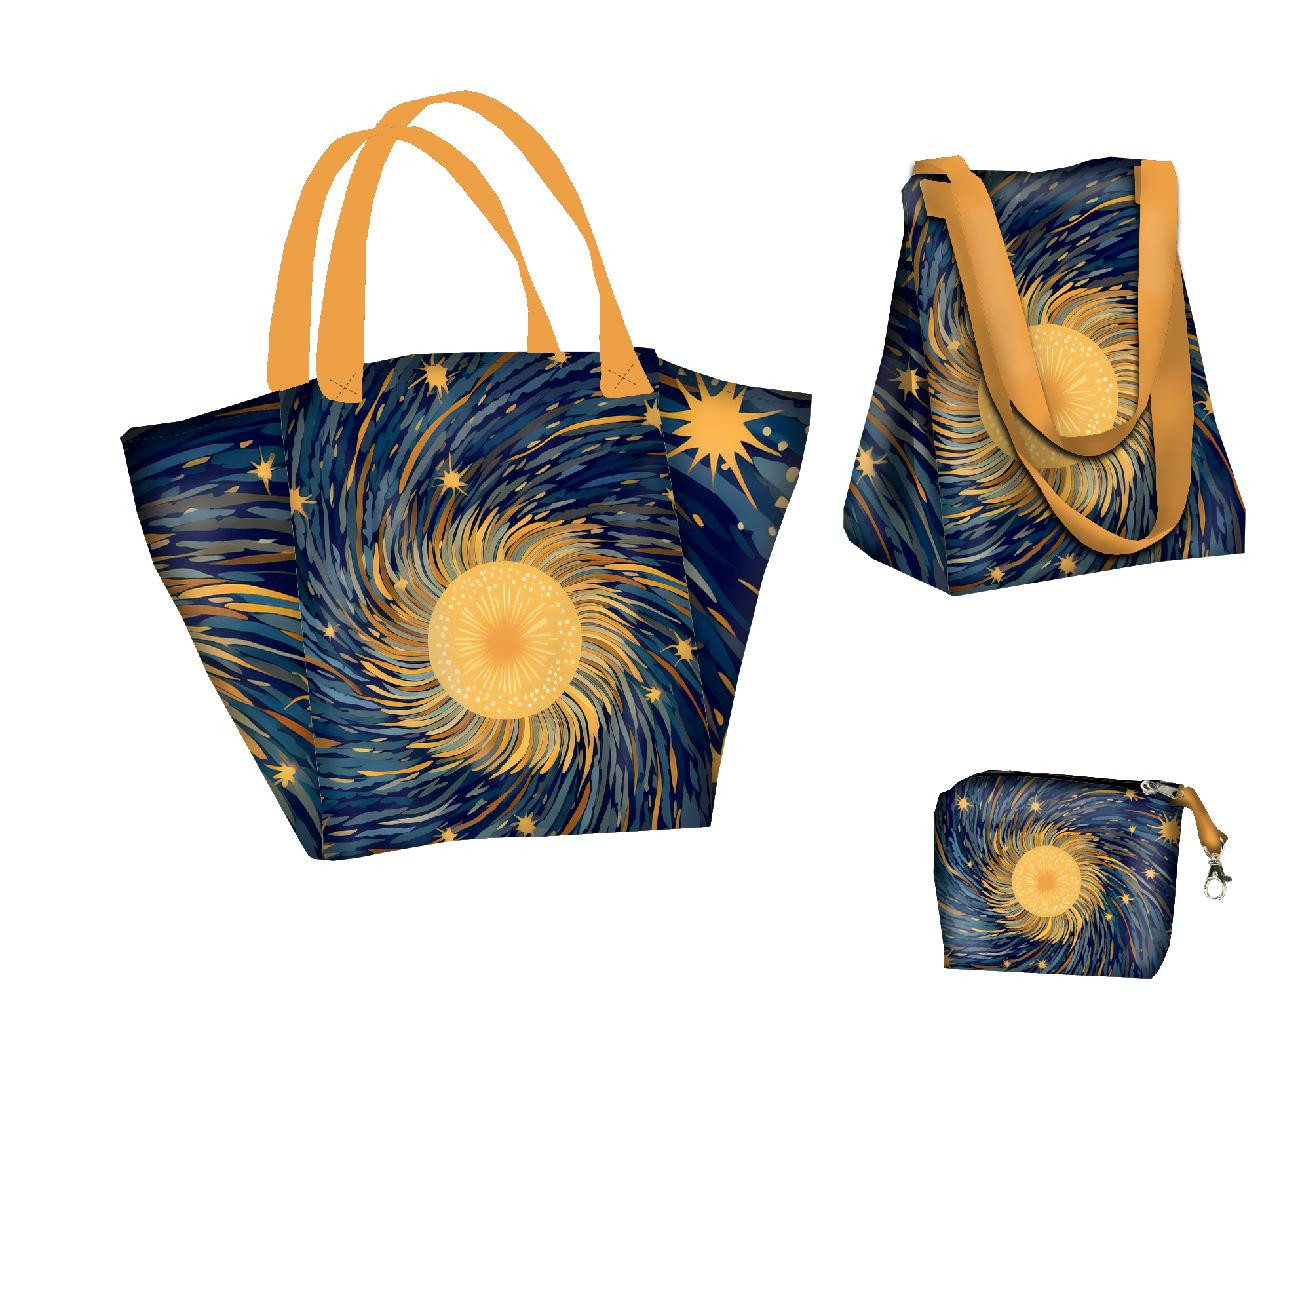 XL bag with in-bag pouch 2 in 1 - WATERCOLOR GALAXY - sewing set